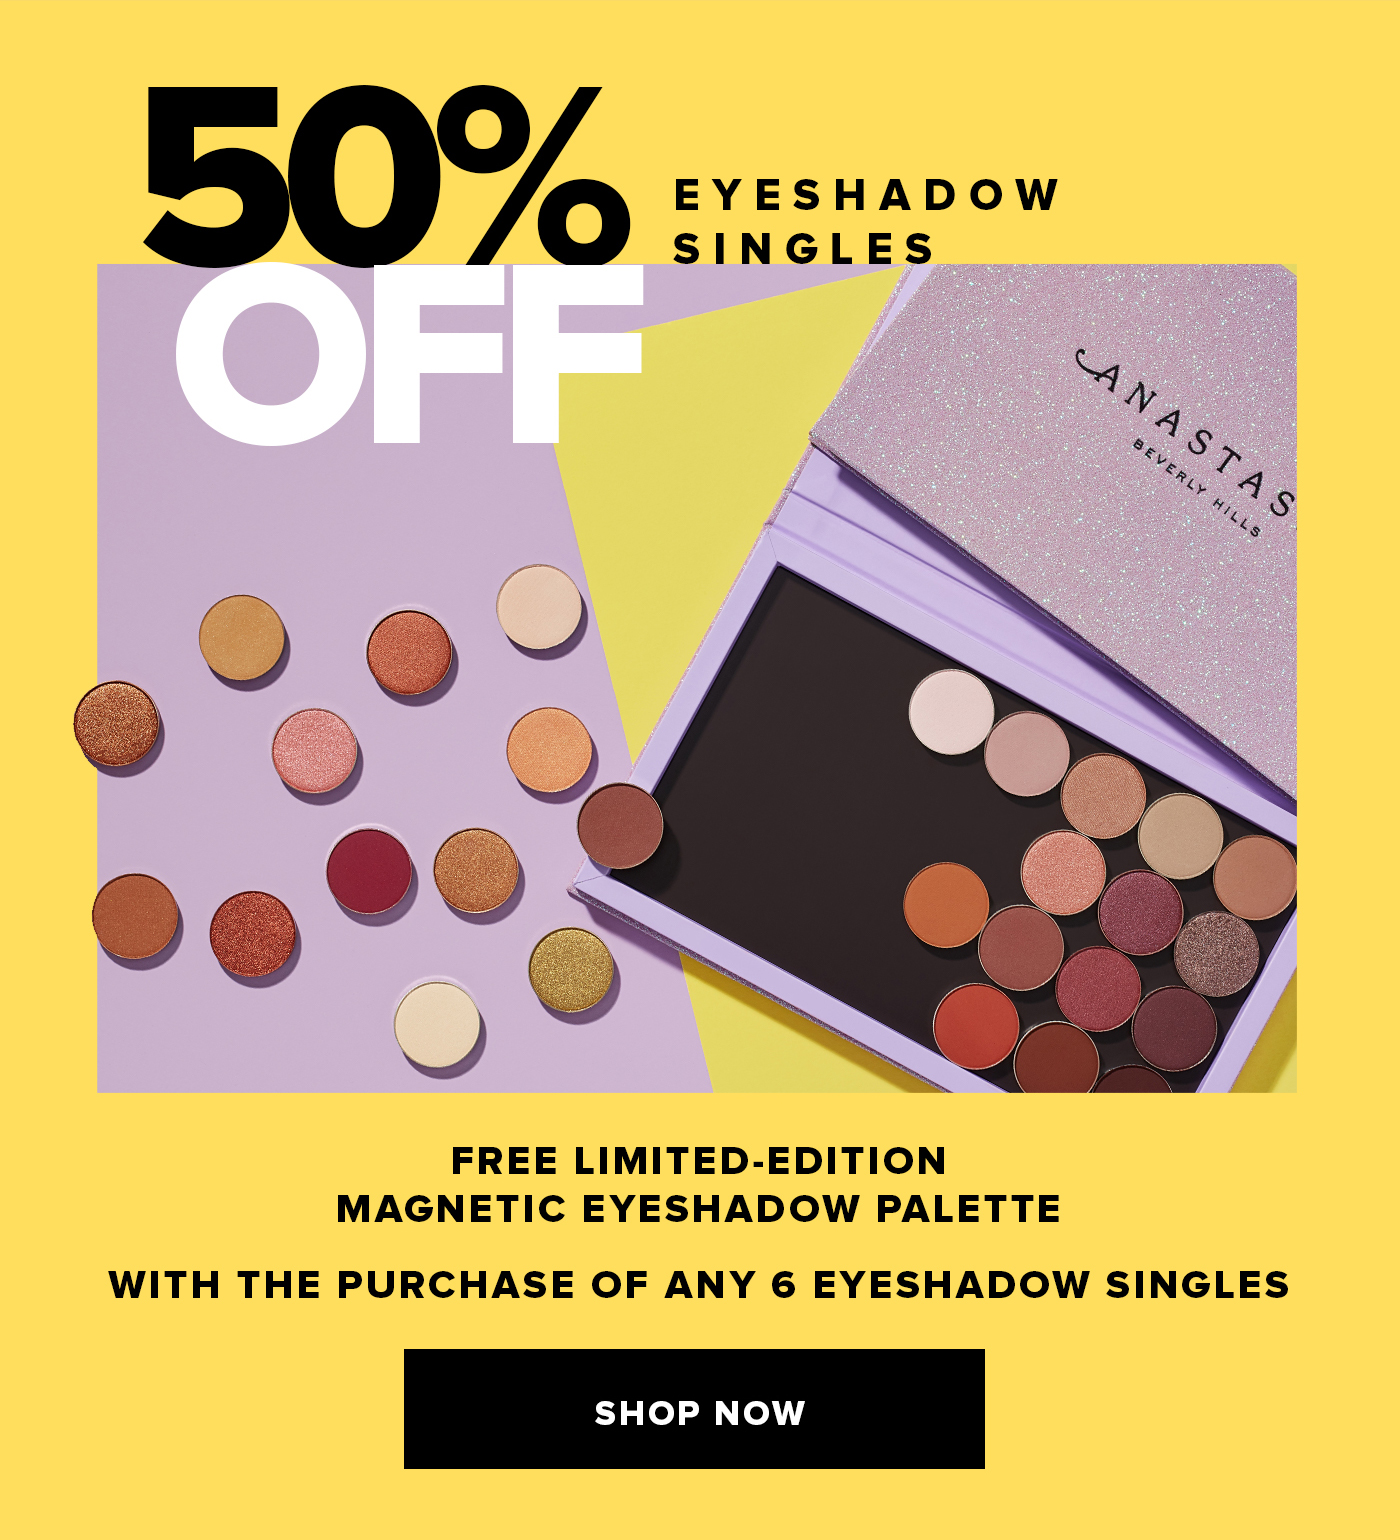 50% OFF EYESHADOW SINGLES. FREE LIMITED-EDITION MAGNETIC EYESHADOW PALETTE WITH THE PURCHASE OF ANY 6 EYESHADOW SINGLES. SHOP NOW